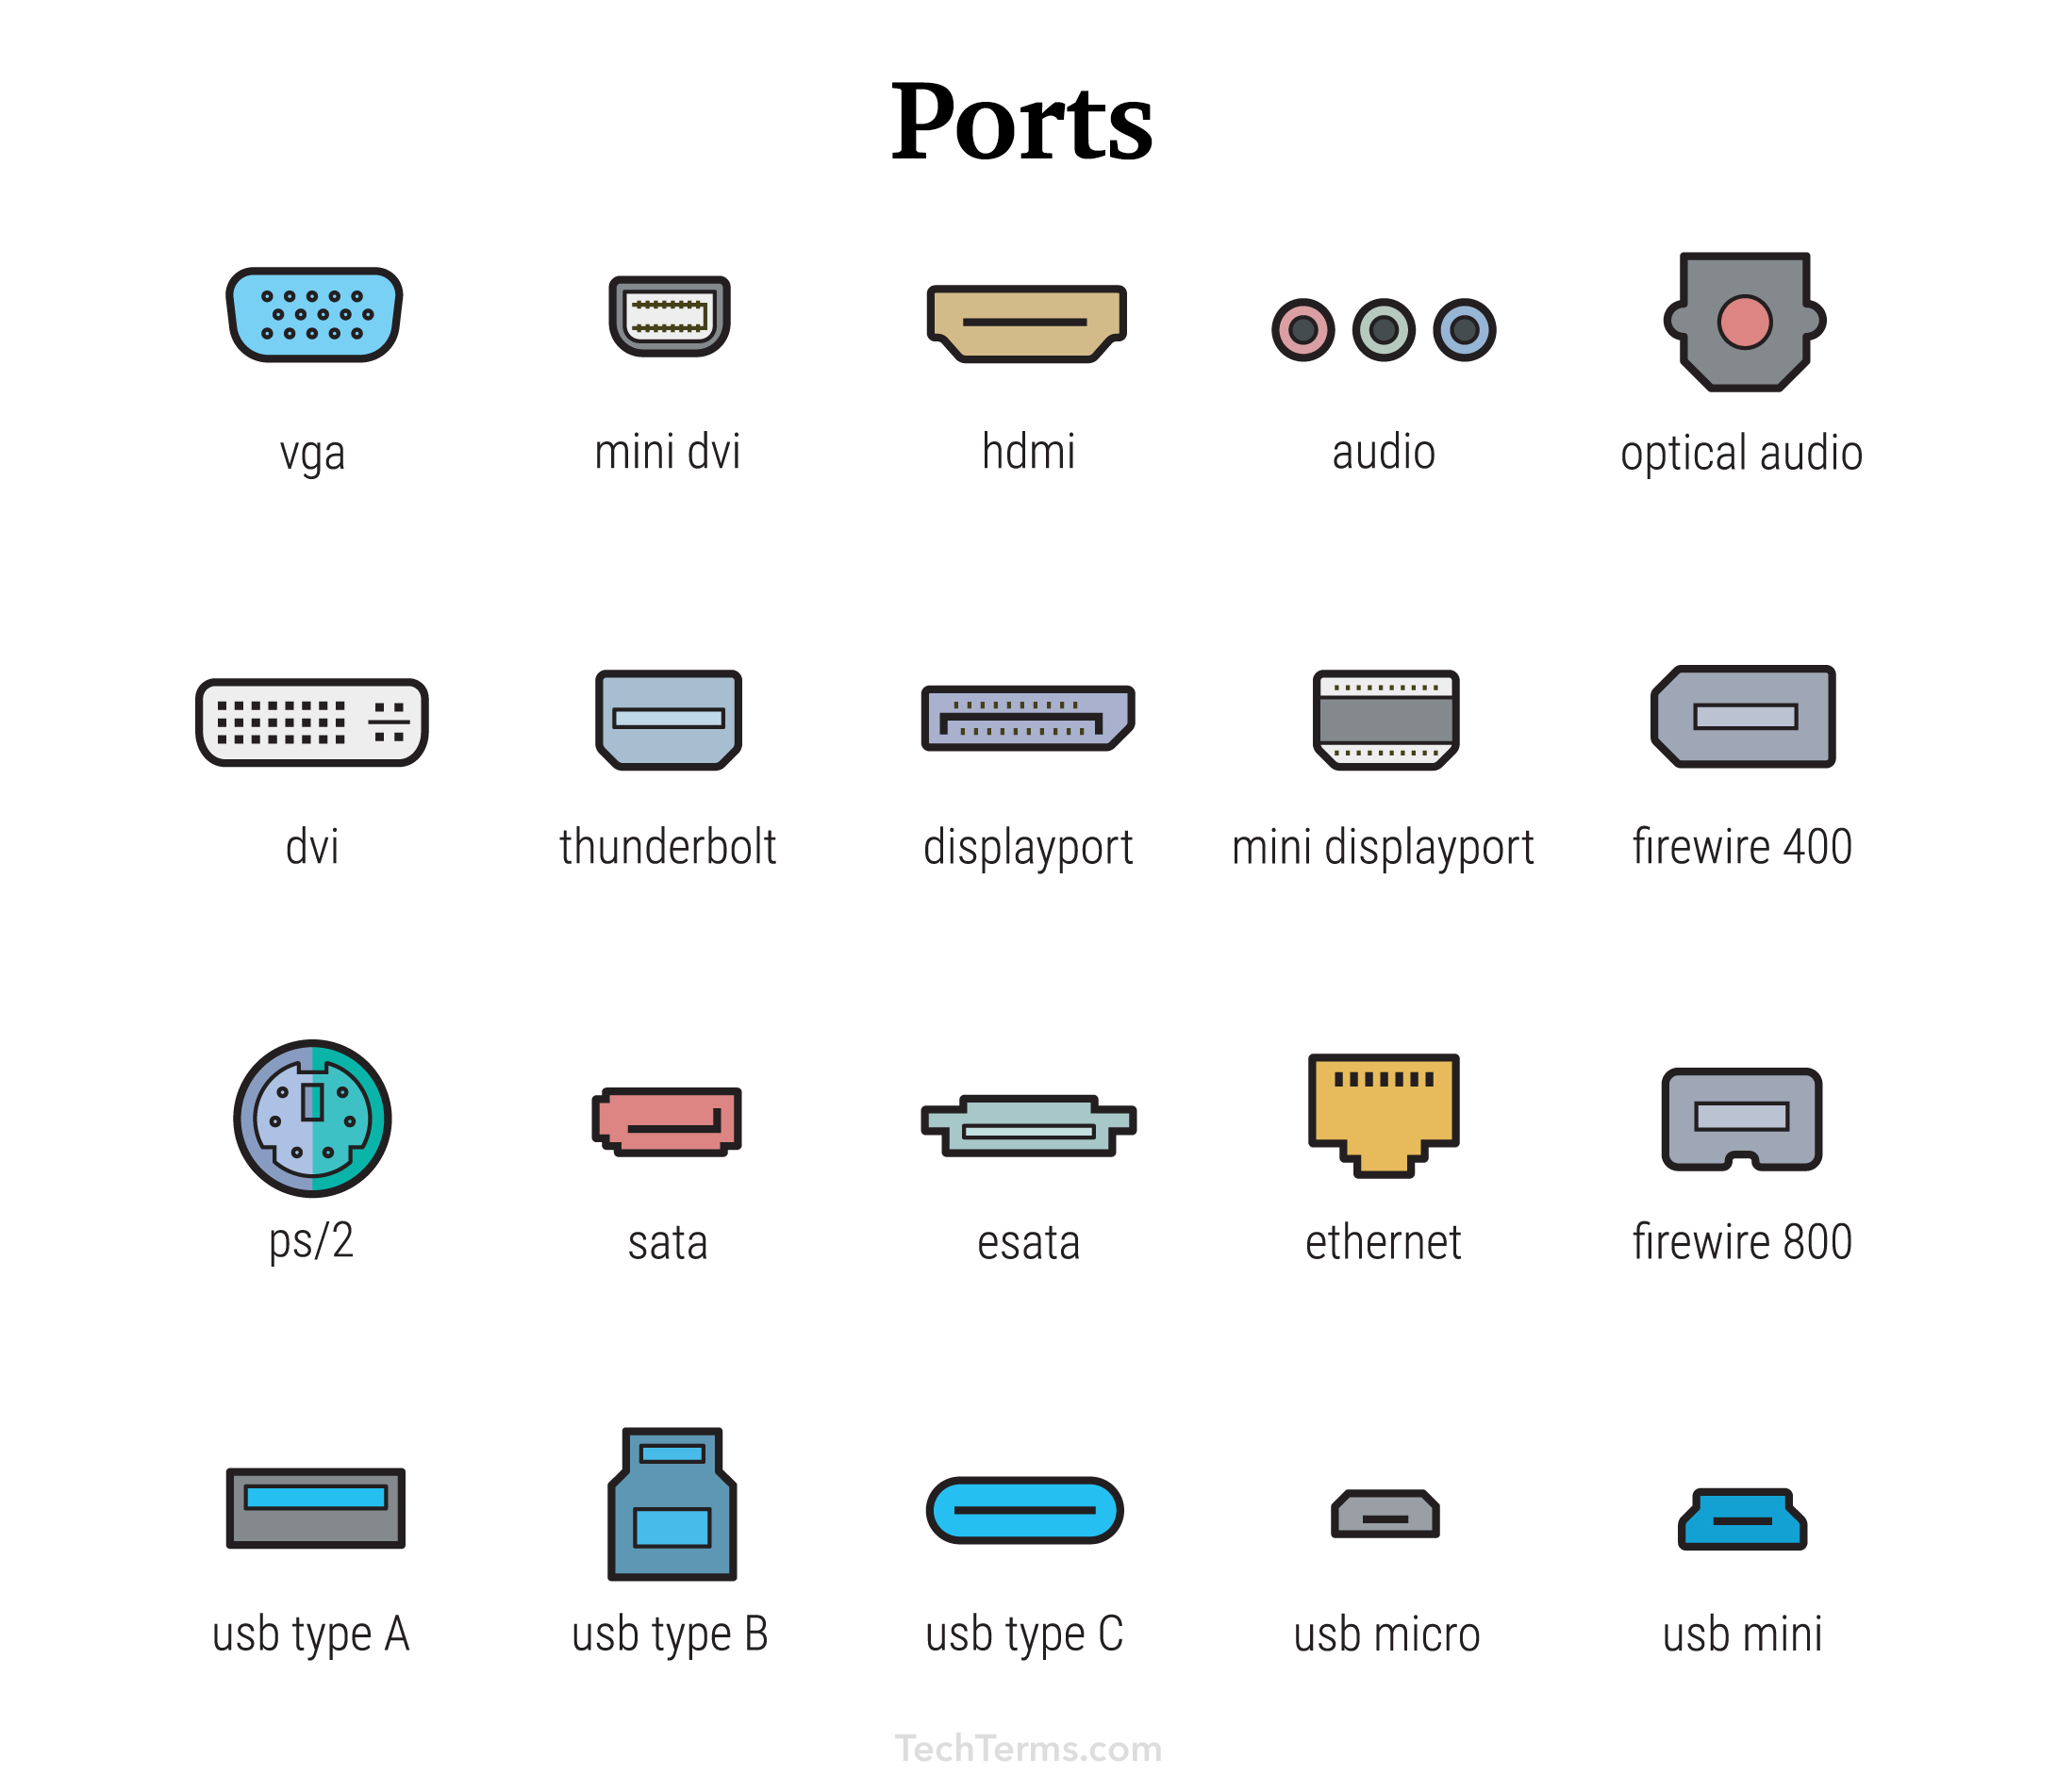 Port Definition - What is a port?